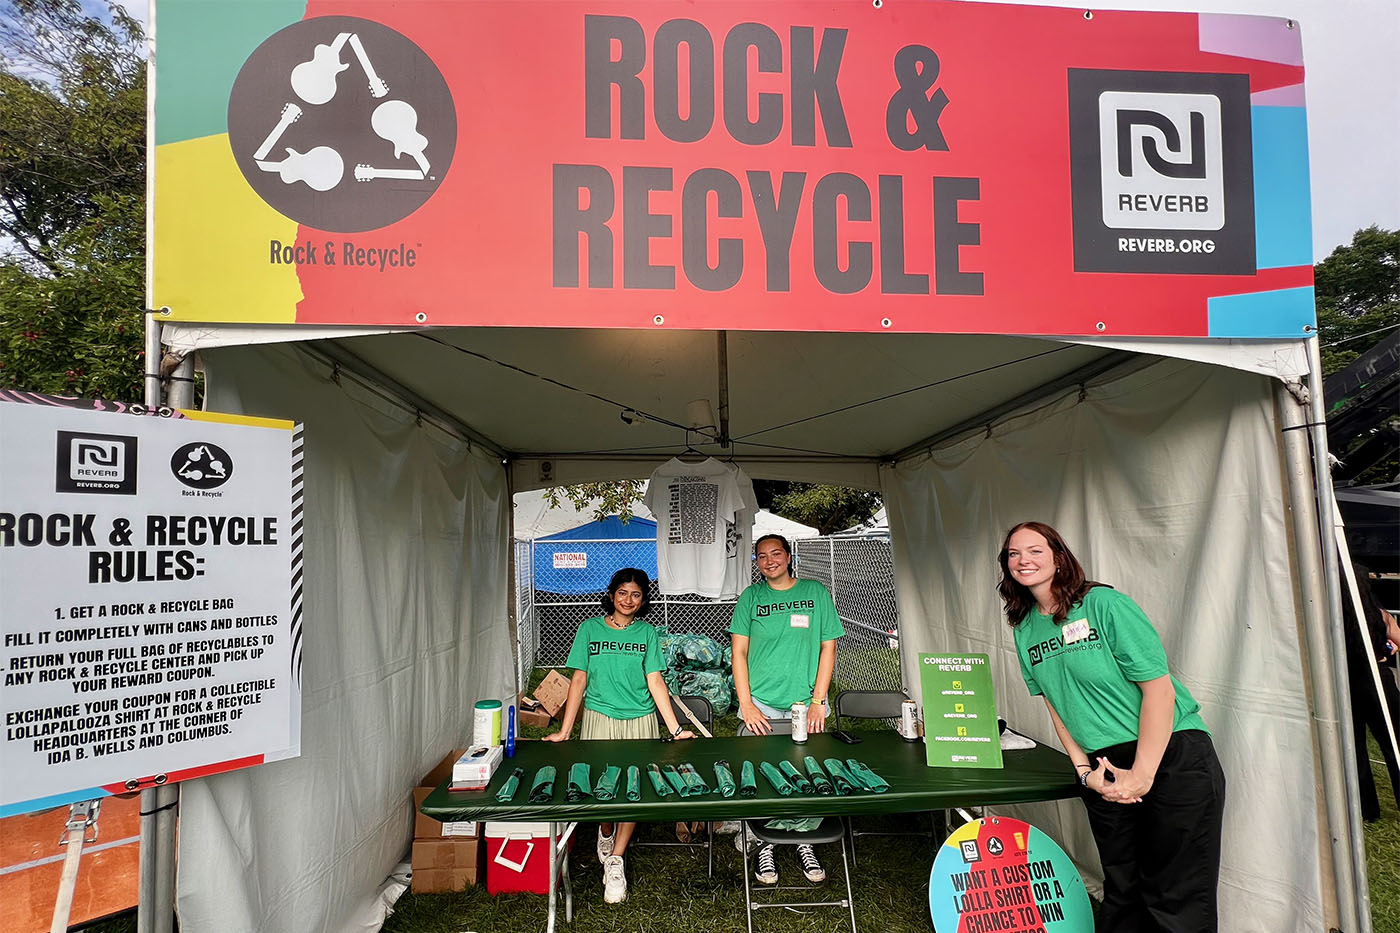 Three people posing under a white tent with a sign that reads "Rock & Recycle" on it.